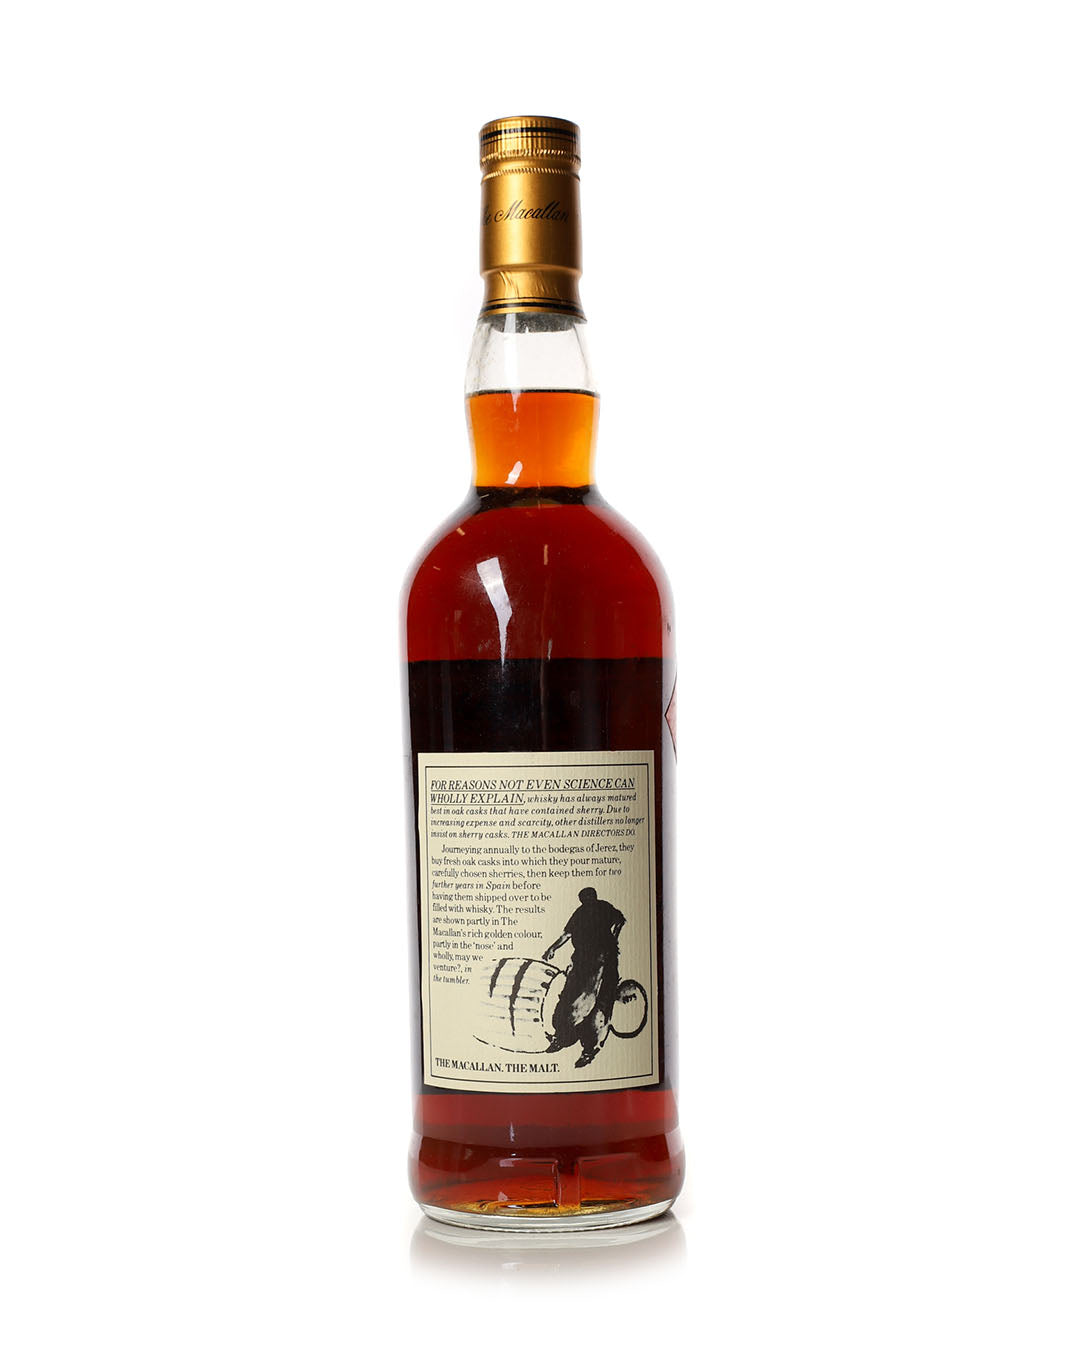 Macallan - 10 Year Old 100 Proof